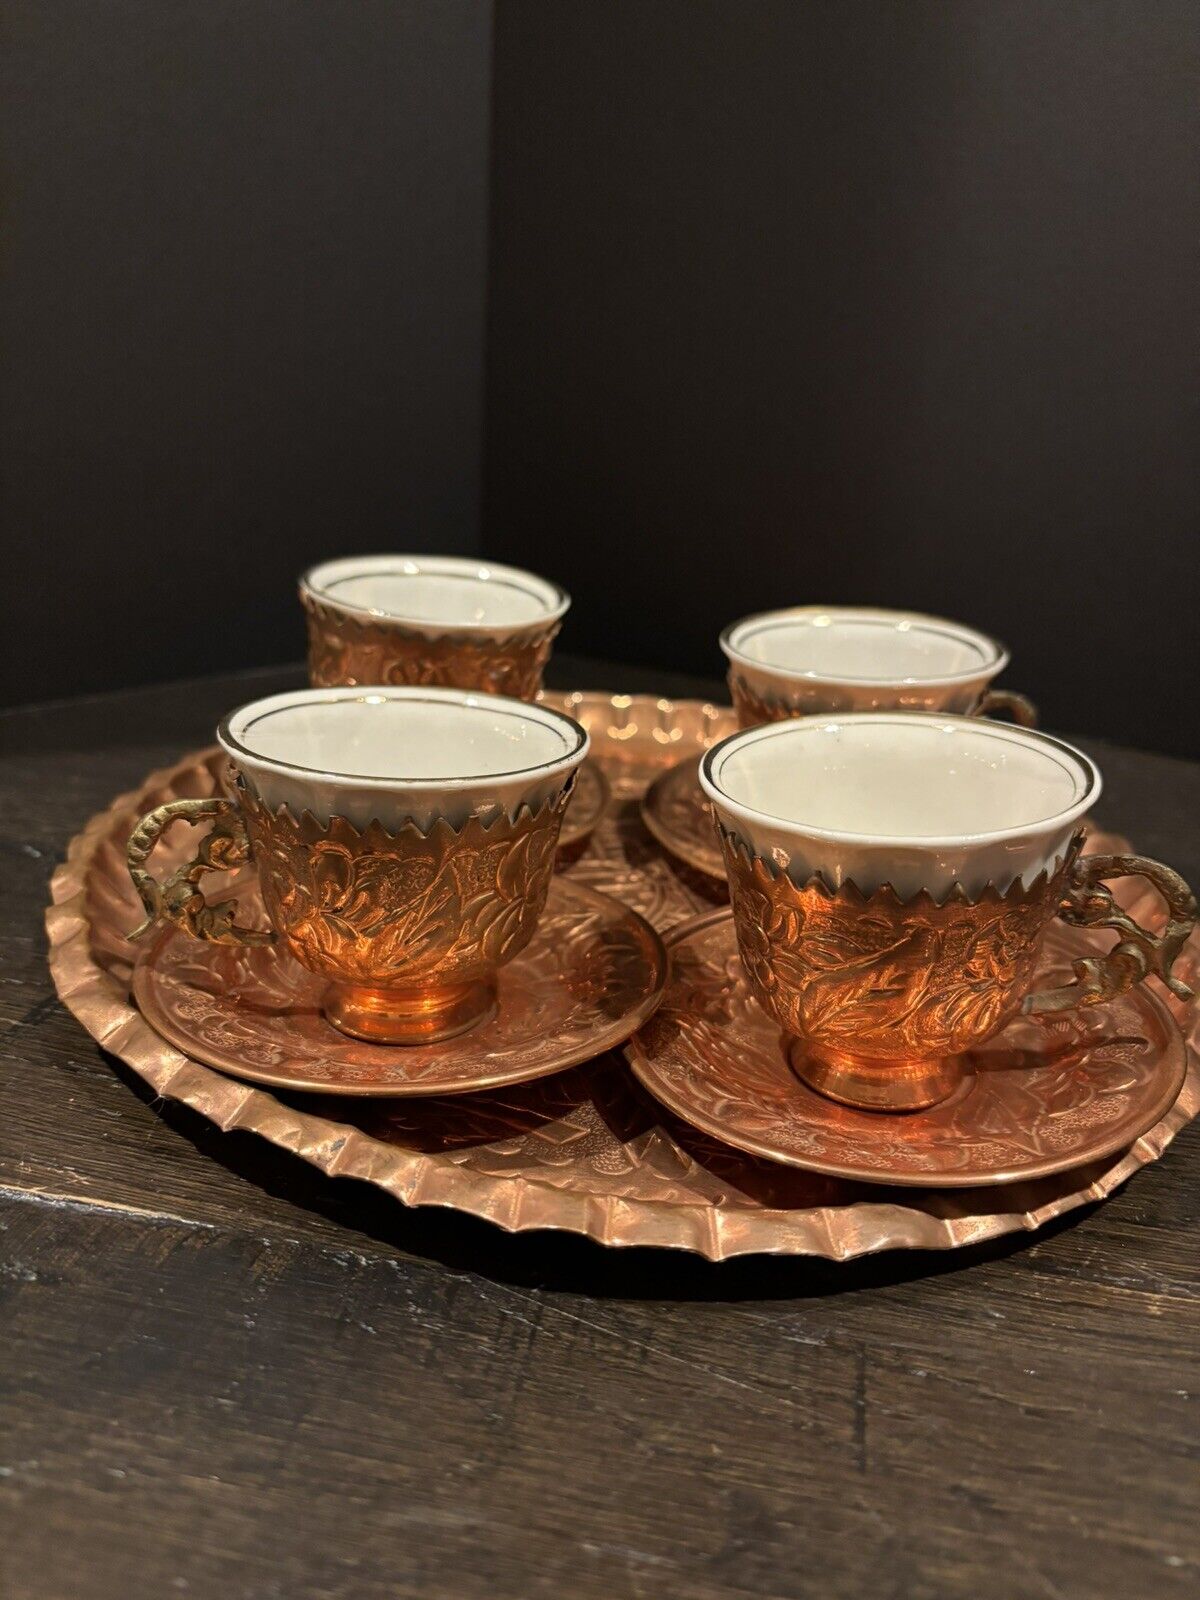 Vtg Ayasofia Copper Plate And 4 Teacups From Turkey